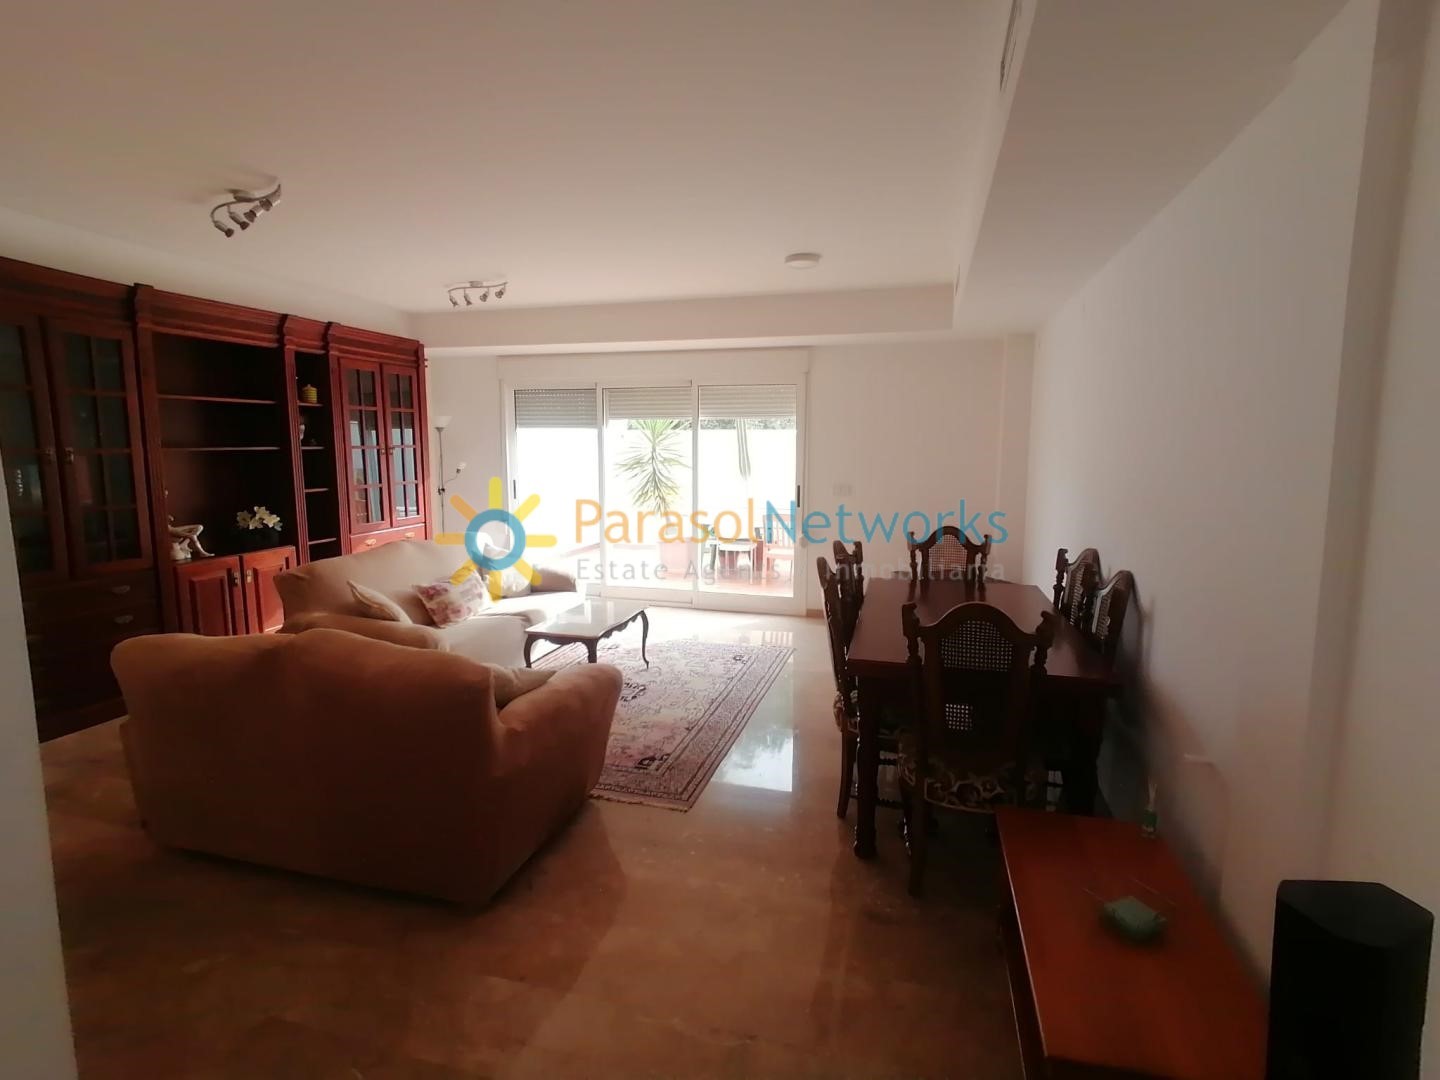 Townhouse for rent in Oliva – Ref: 274